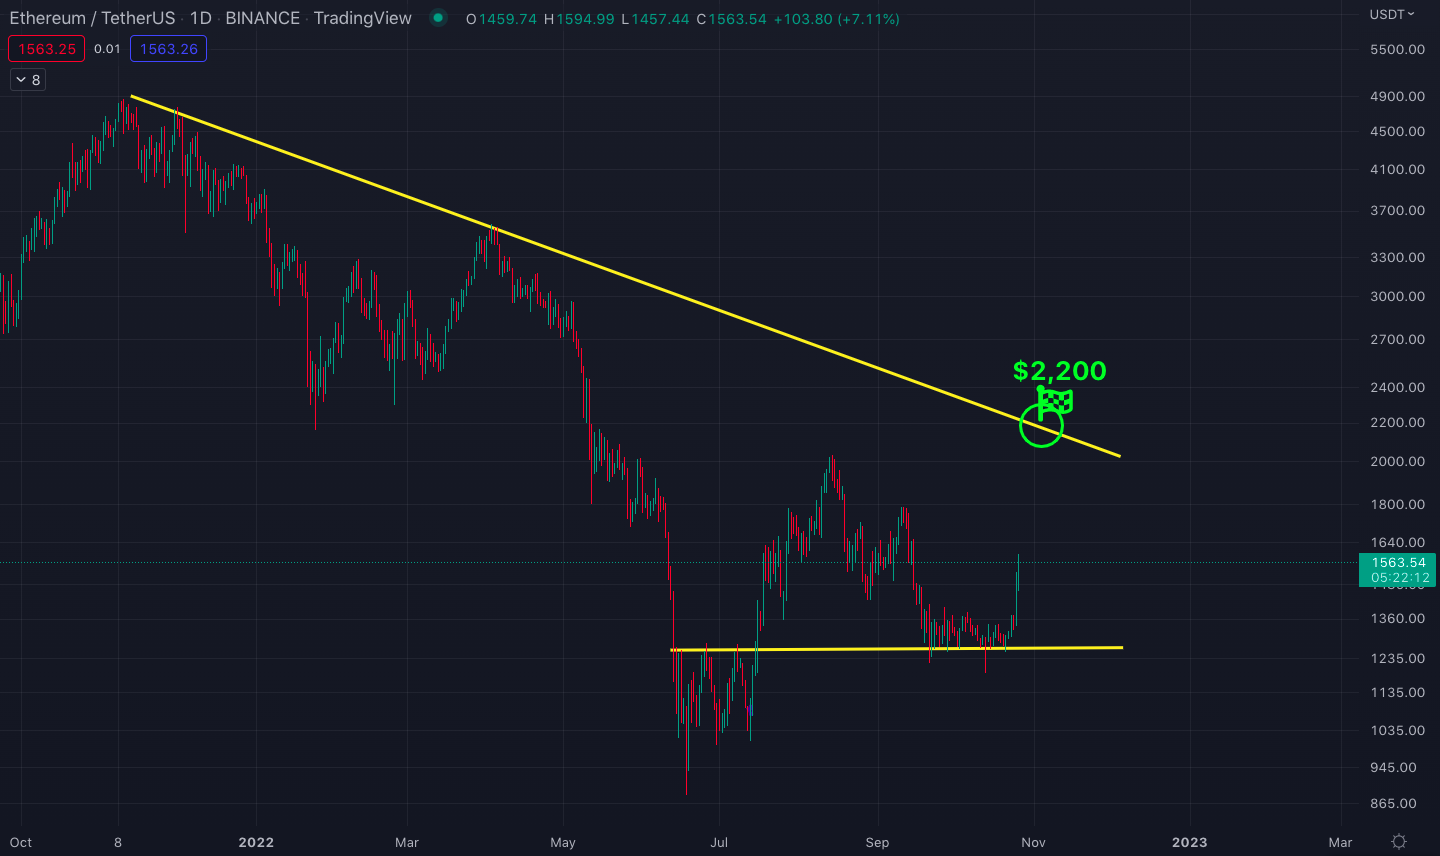 Ethereum/U.S. dollar price chart with the $2,200 descending resistance target